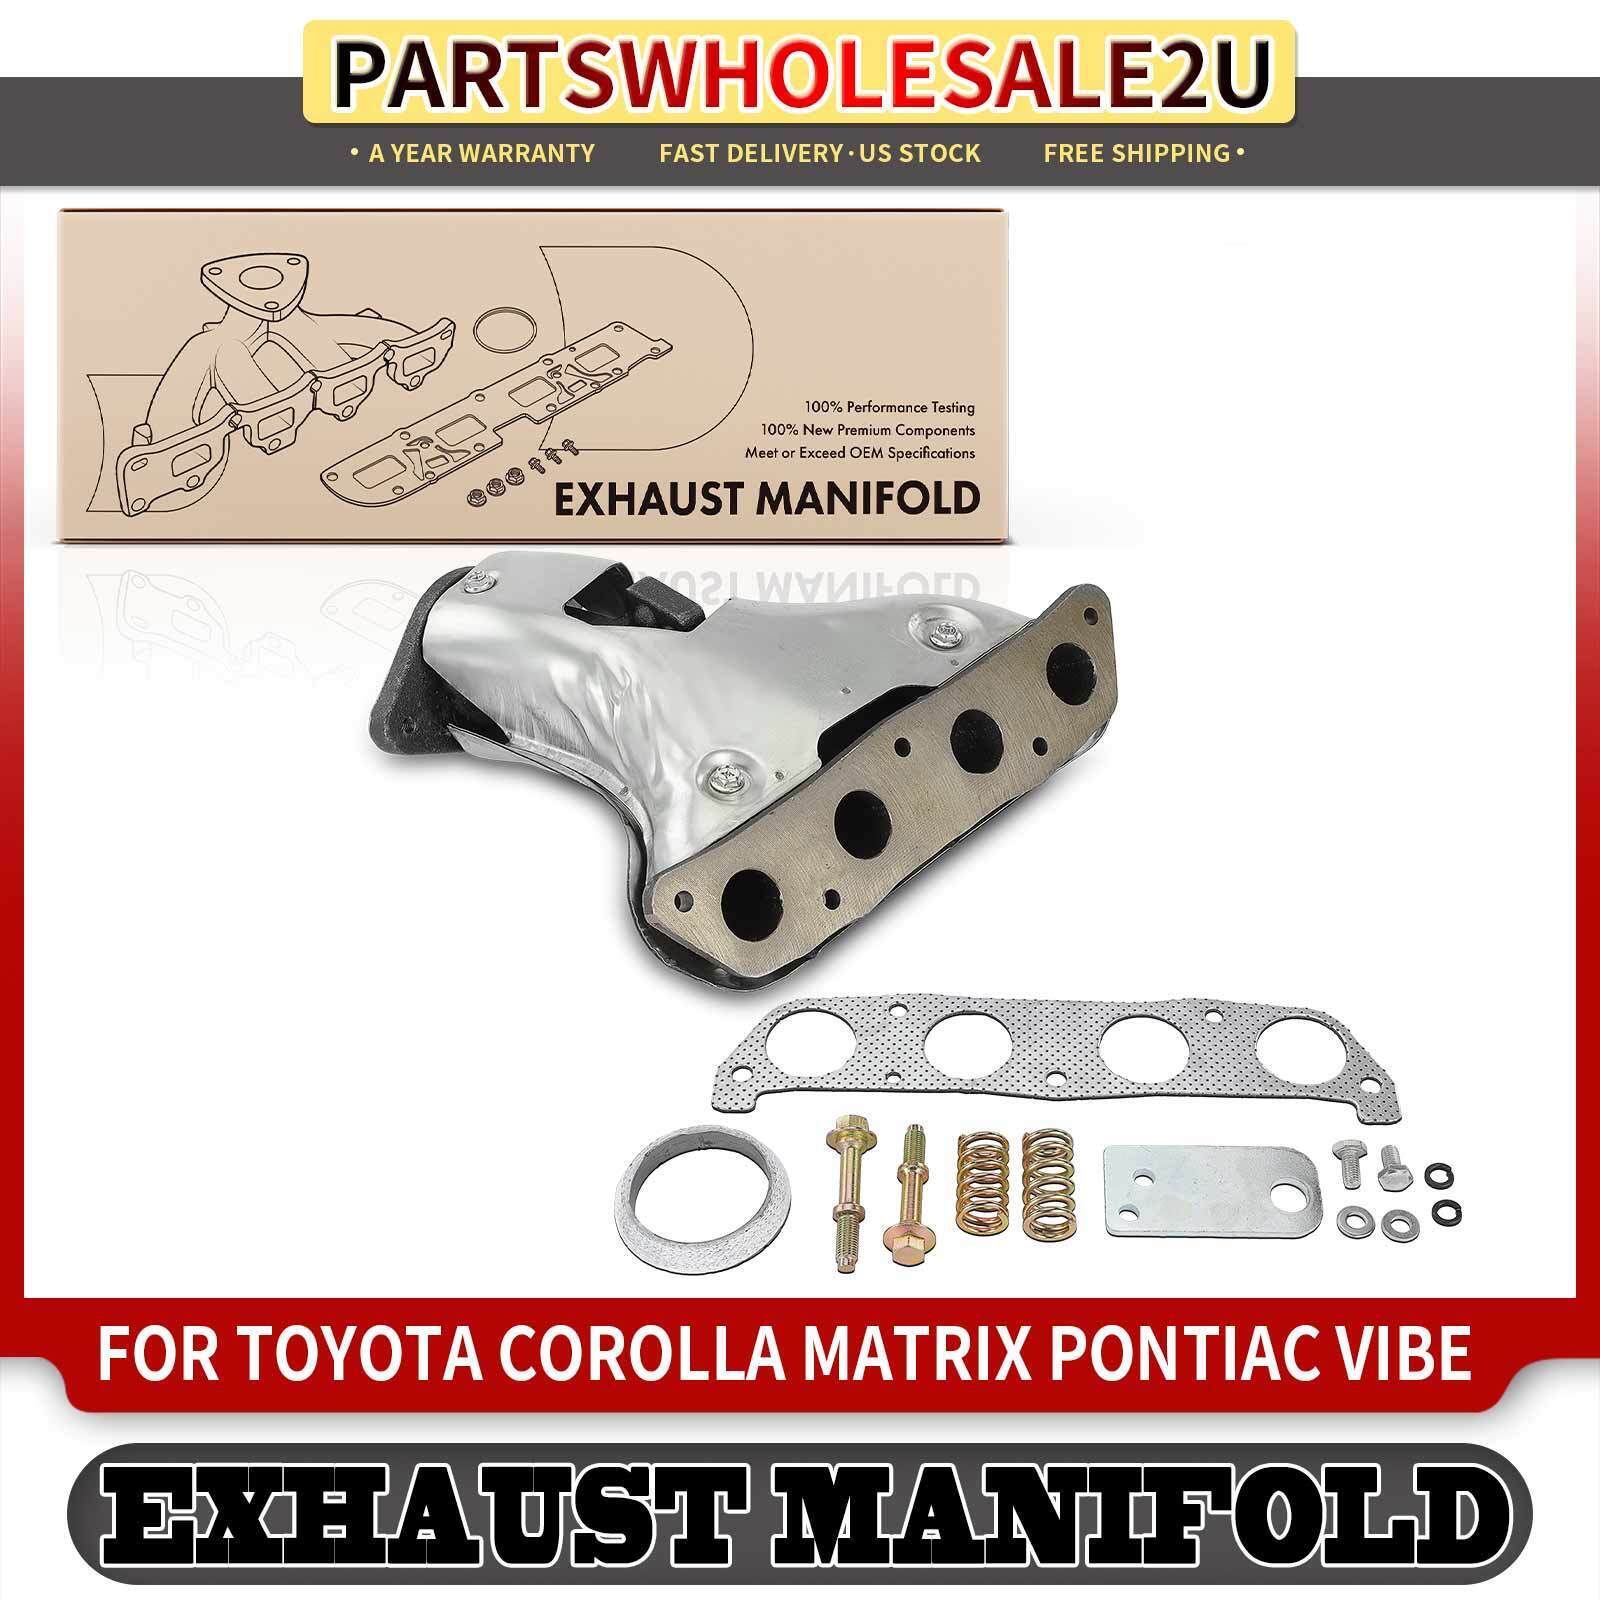 Exhaust Manifold with Gasket for Toyota Corolla 2002-2008 Matrix Pontiac Vibe